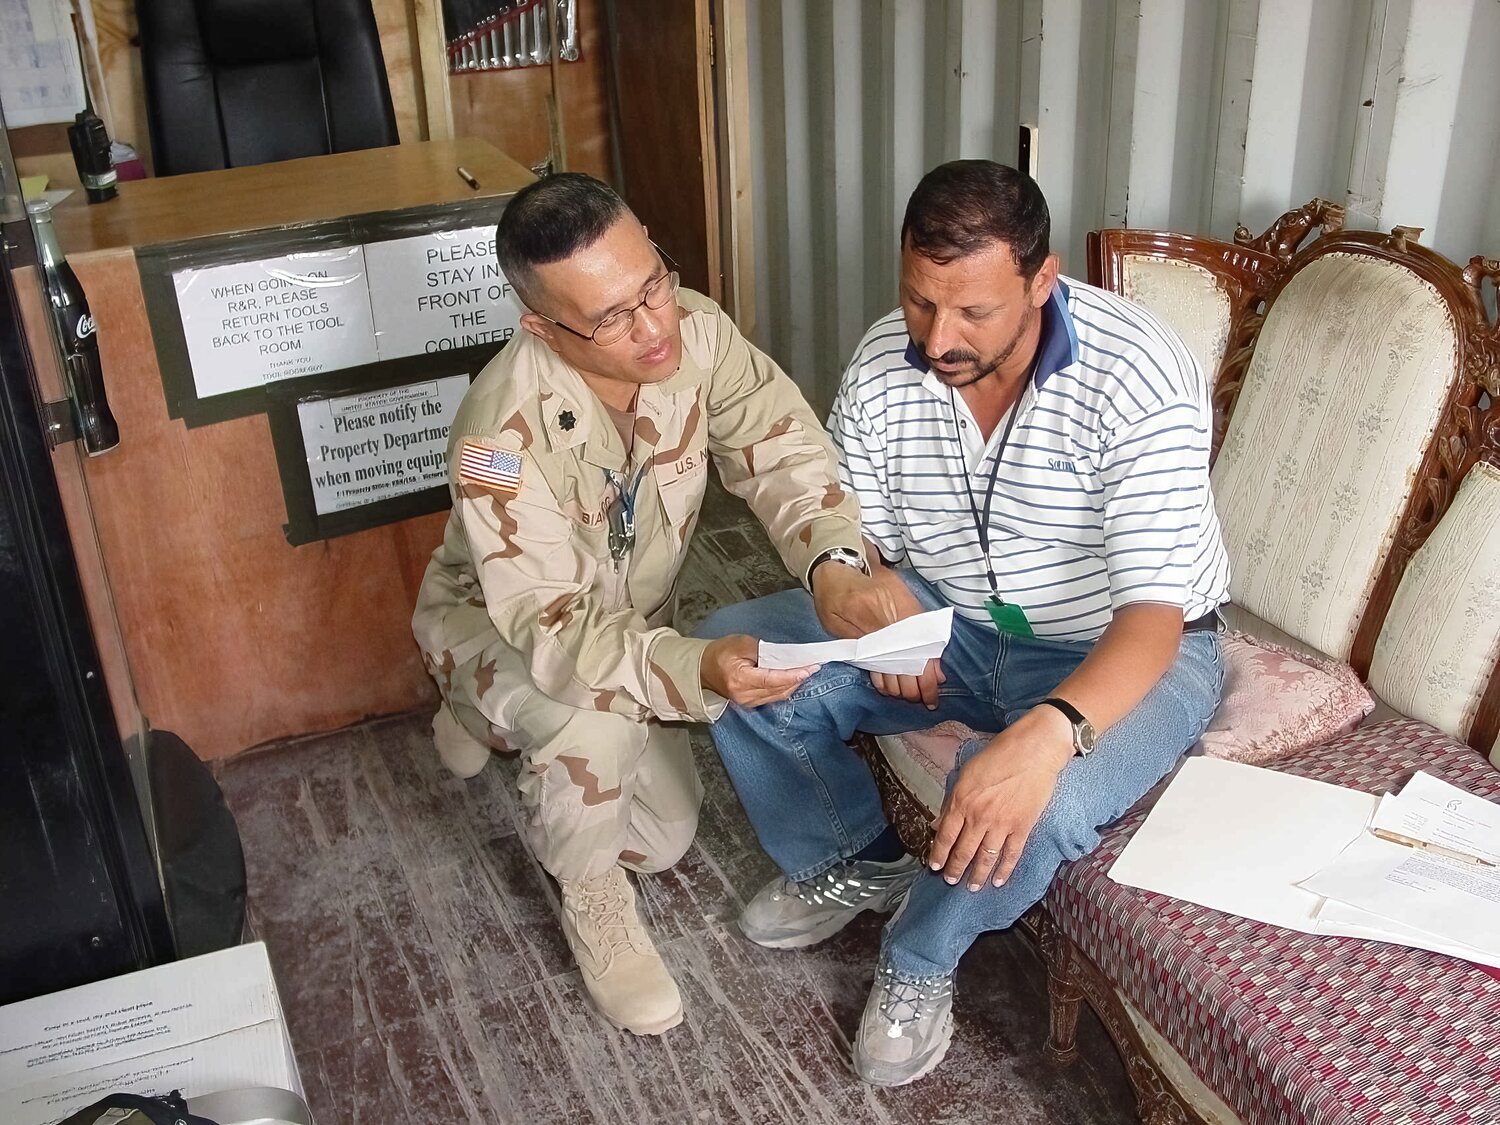 Saying prayer, encouraging words, and offering support to Thair Behnan, August 17, 2004, at Camp Liberty, Baghdad, Iraq.